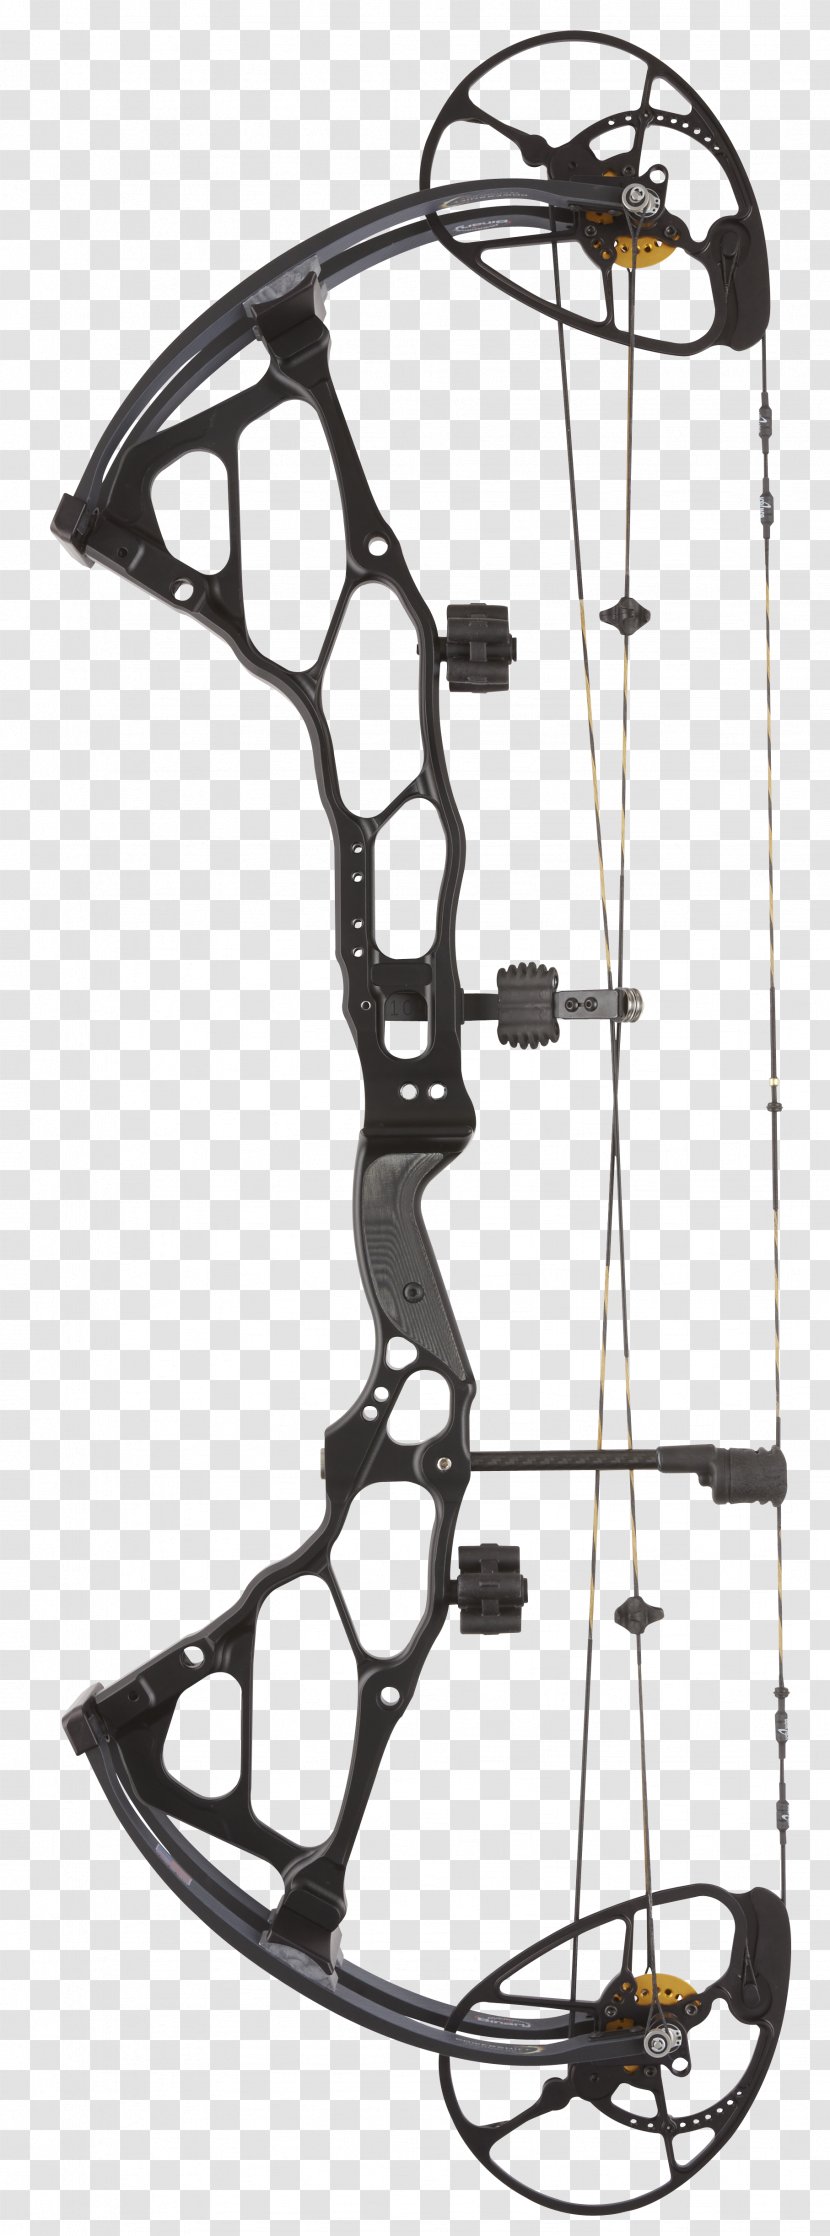 Bowhunting Compound Bows Bow And Arrow Archery Transparent PNG